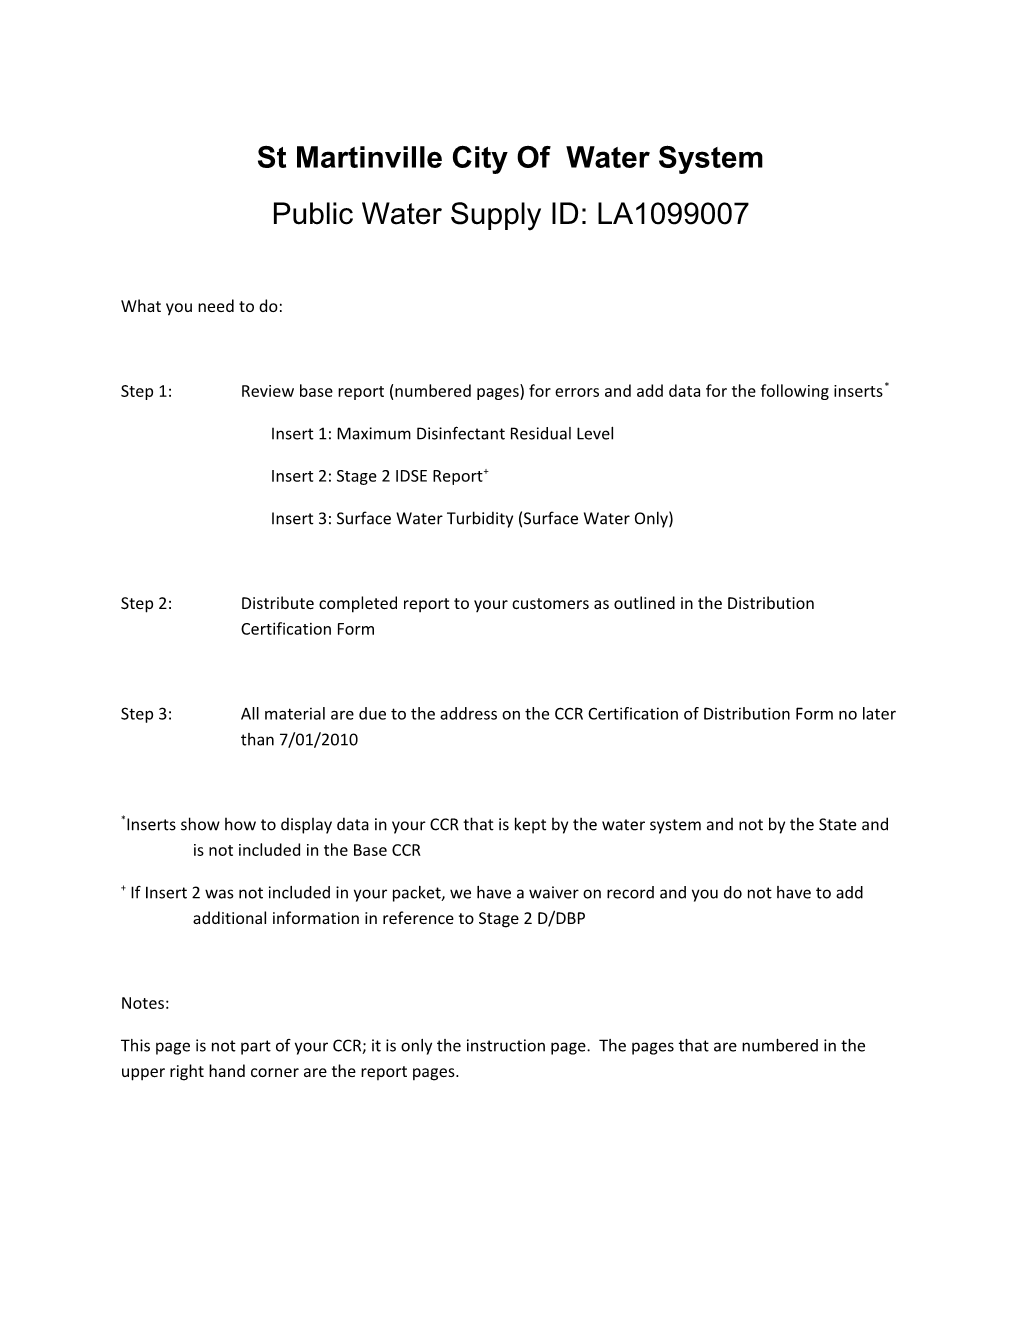 St Martinville City of Water System